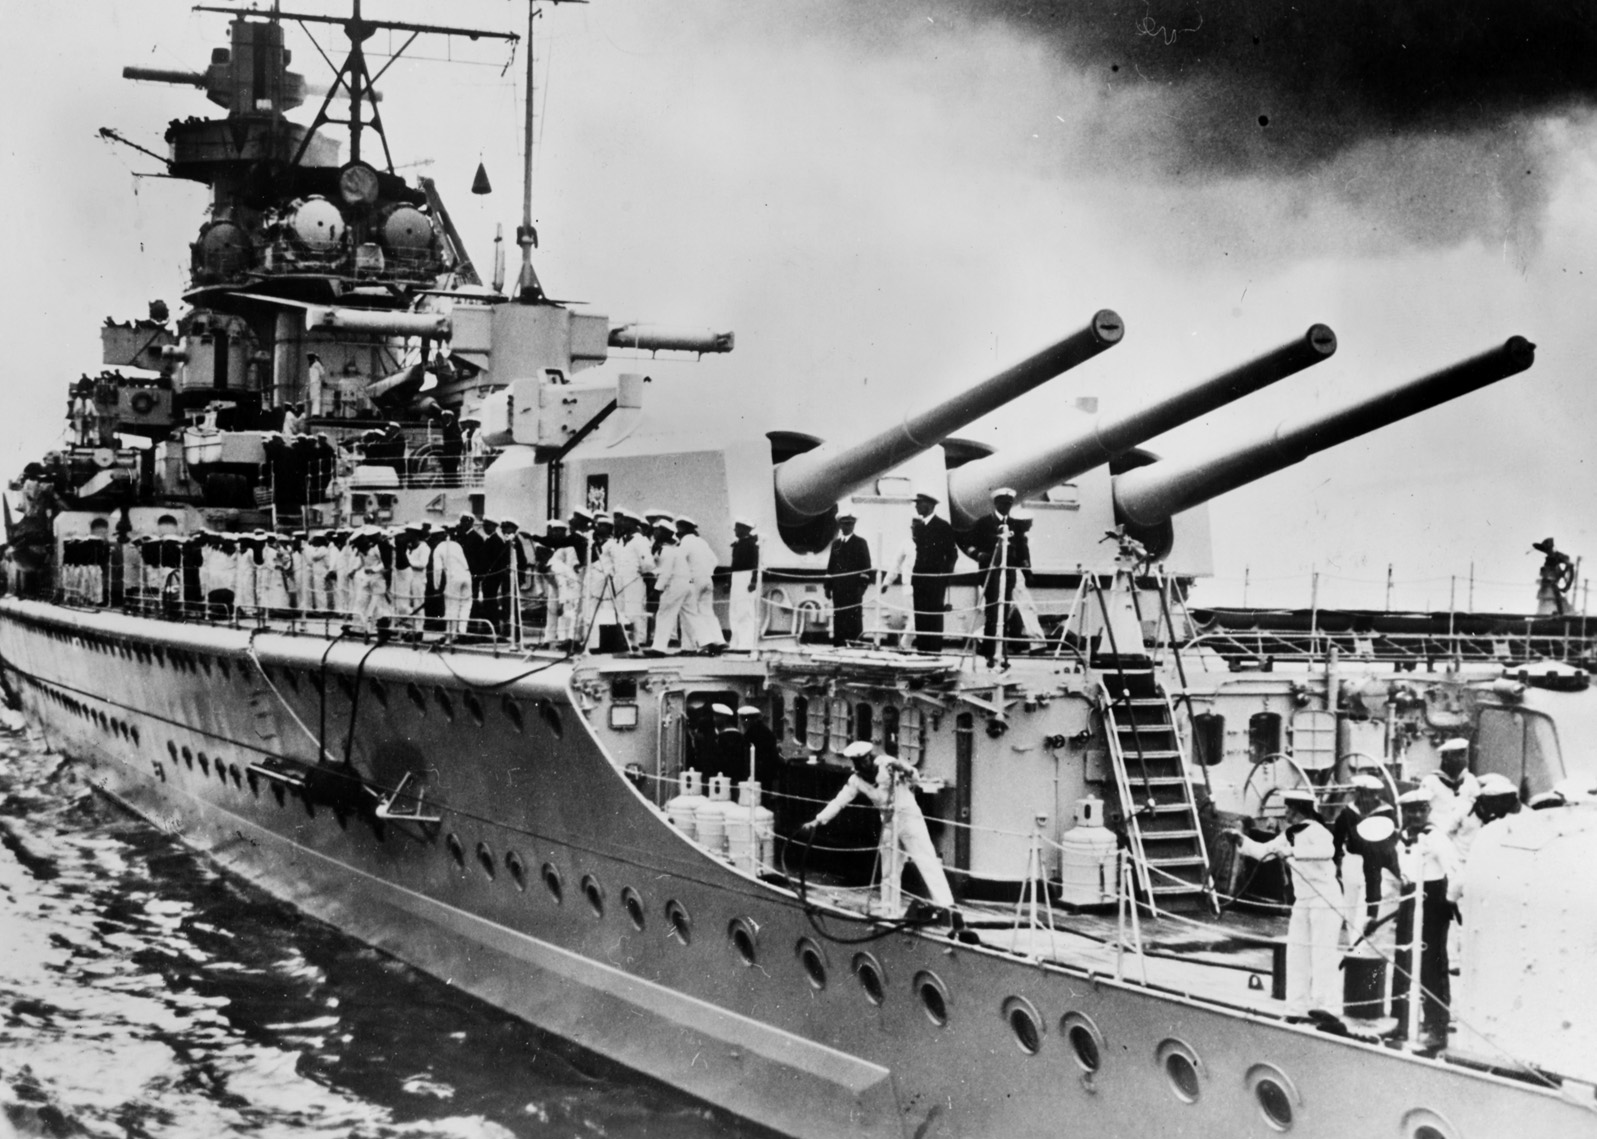 With a number of its crewmen on deck, the Graf Spee is shown in European waters in mid-1939. The German surface raider was armed with menacing 11-inch main guns. These had greater range than the guns of the Allied cruisers that faced Graf Spee off the River Plate. 